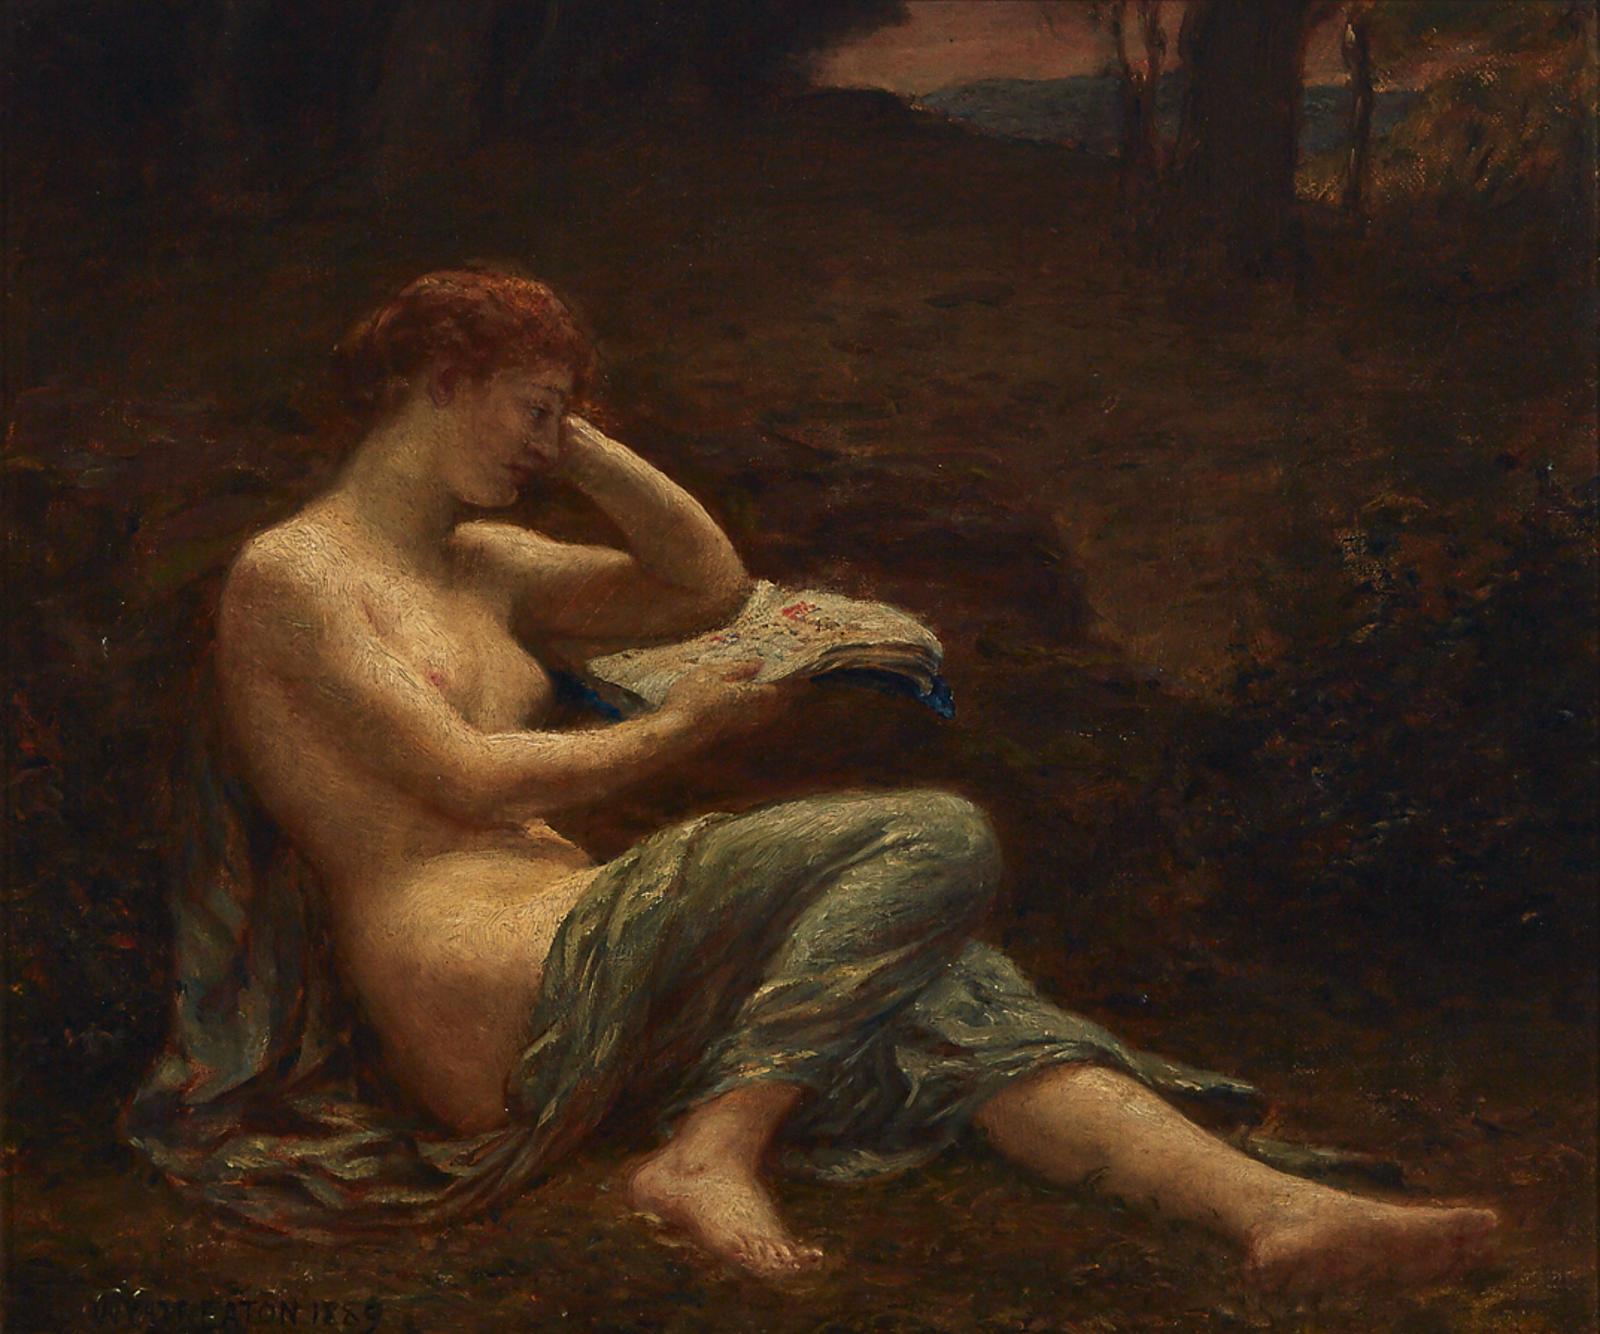 Wyatt Eaton (1849-1896) - Ariadne, The Classically Draped Nude Reading In A Forest, 1889